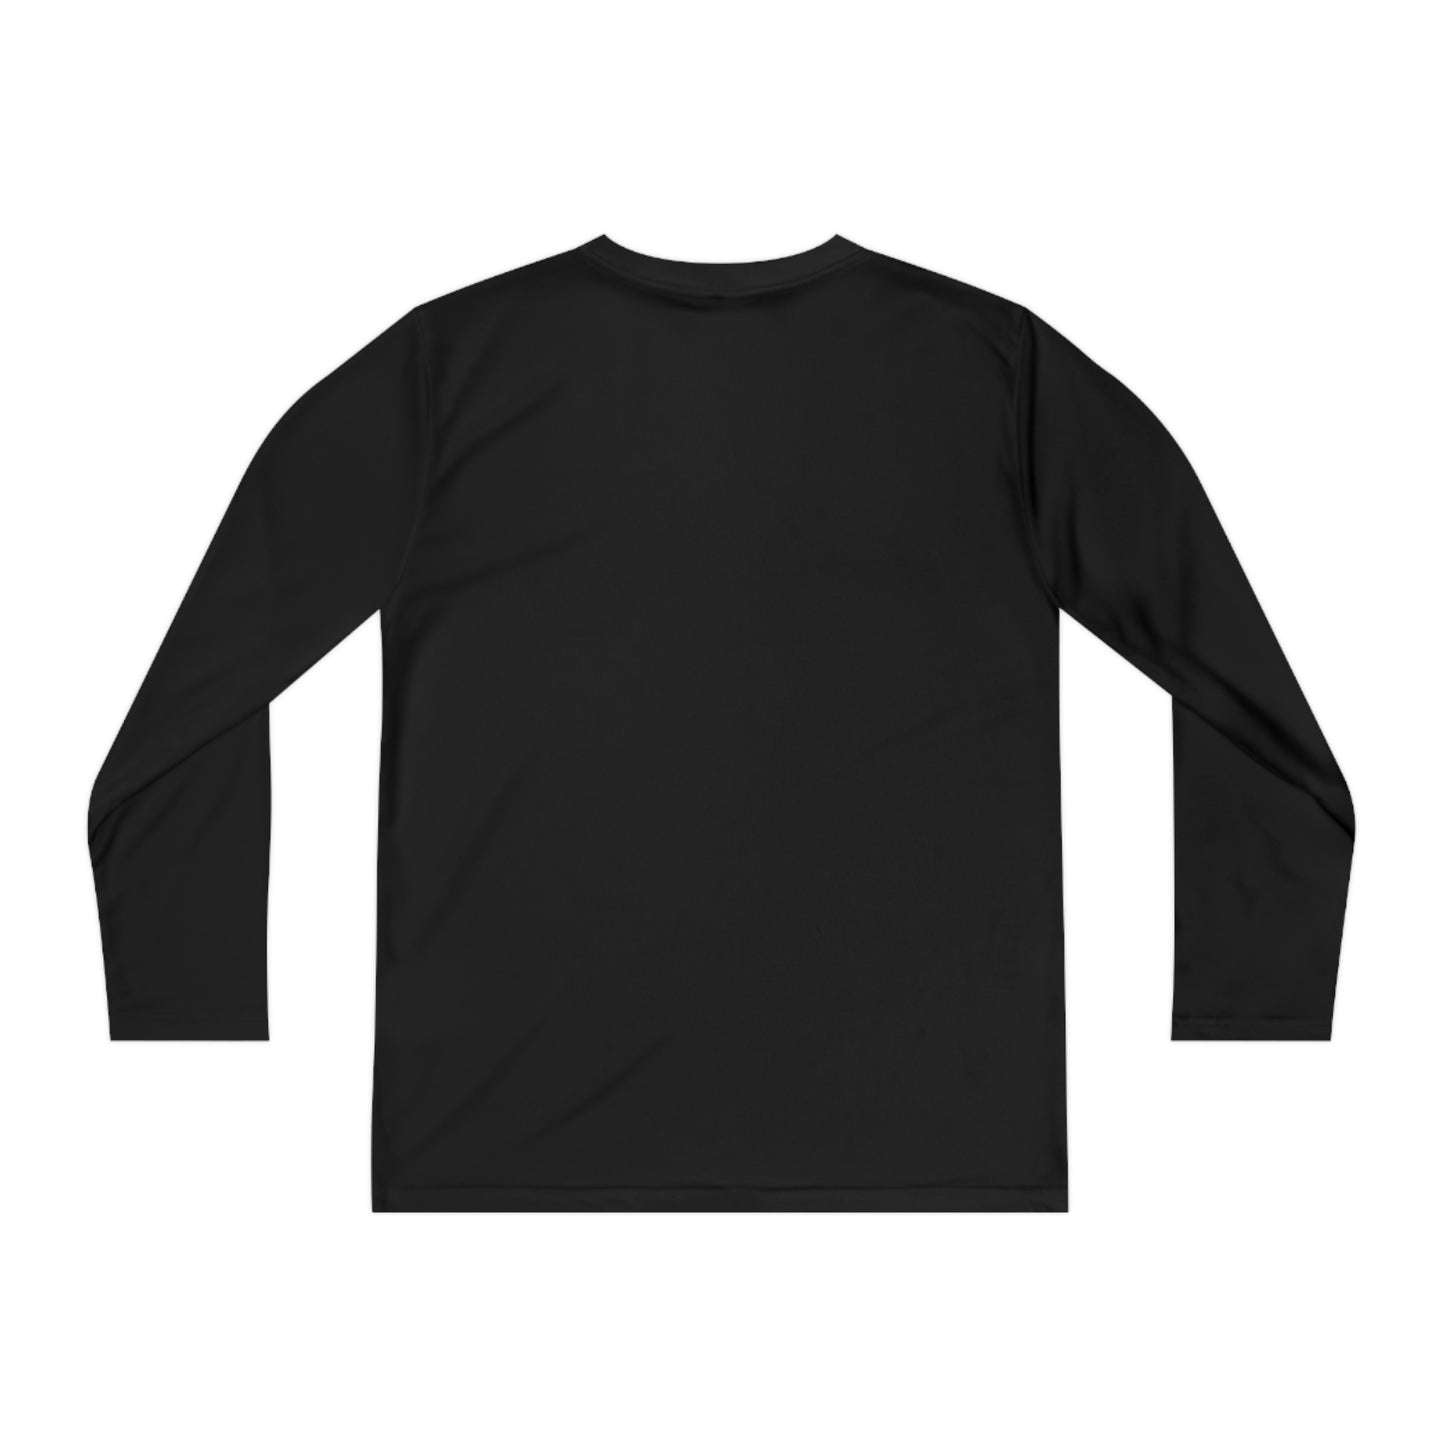 Comet Volleyball - Youth Long Sleeve Competitor Tee